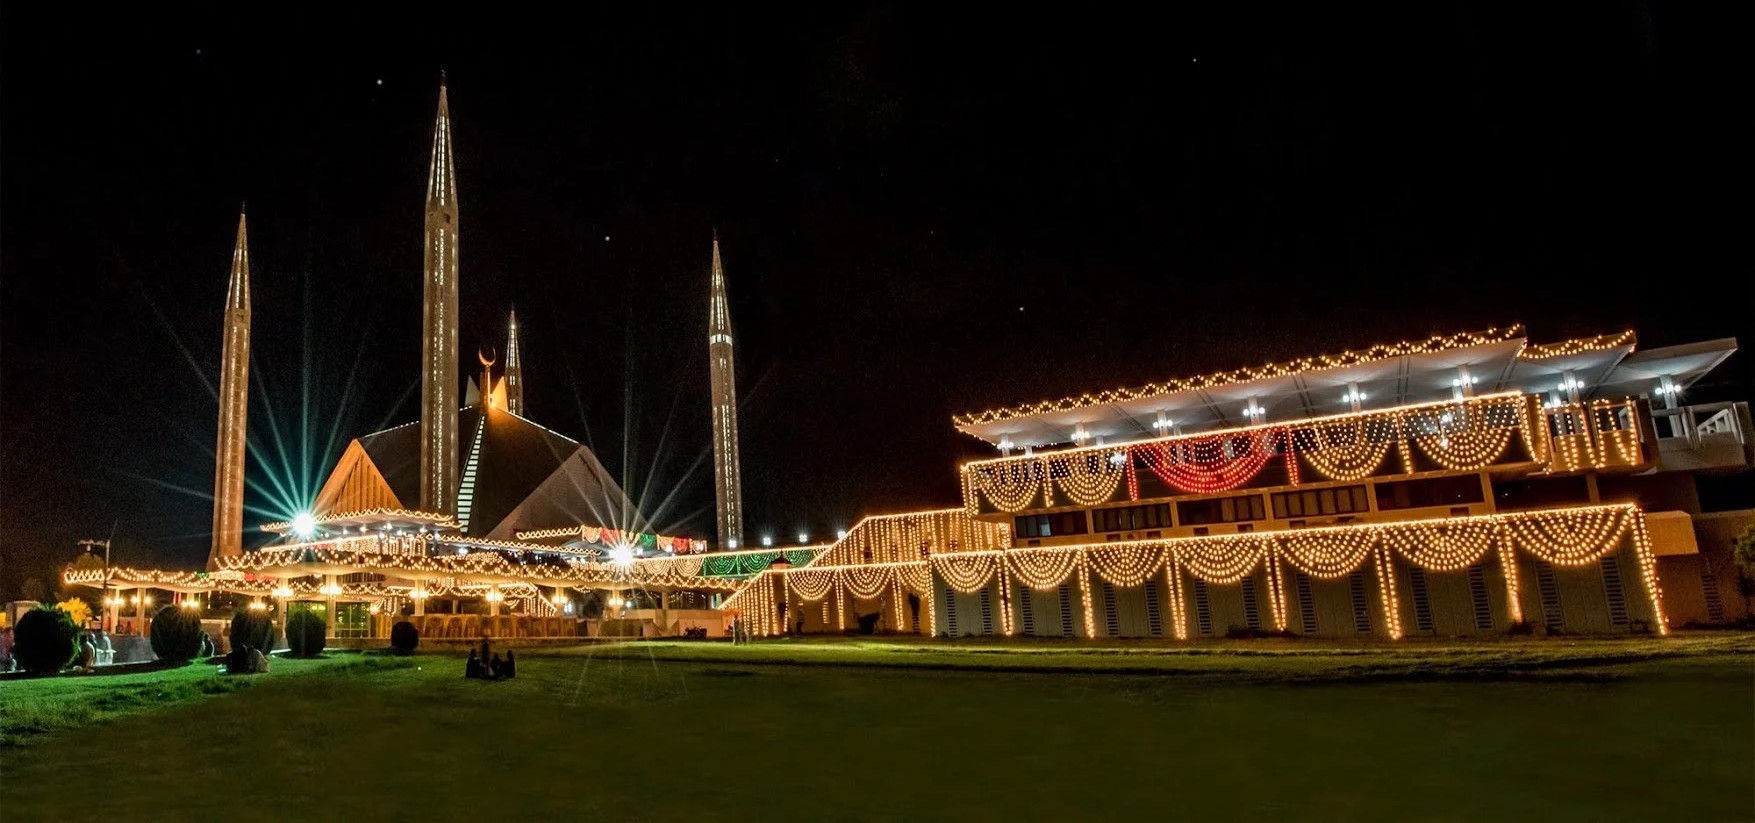 Faisal Mosque in Islamabad, Pakistan, decorated for Eid